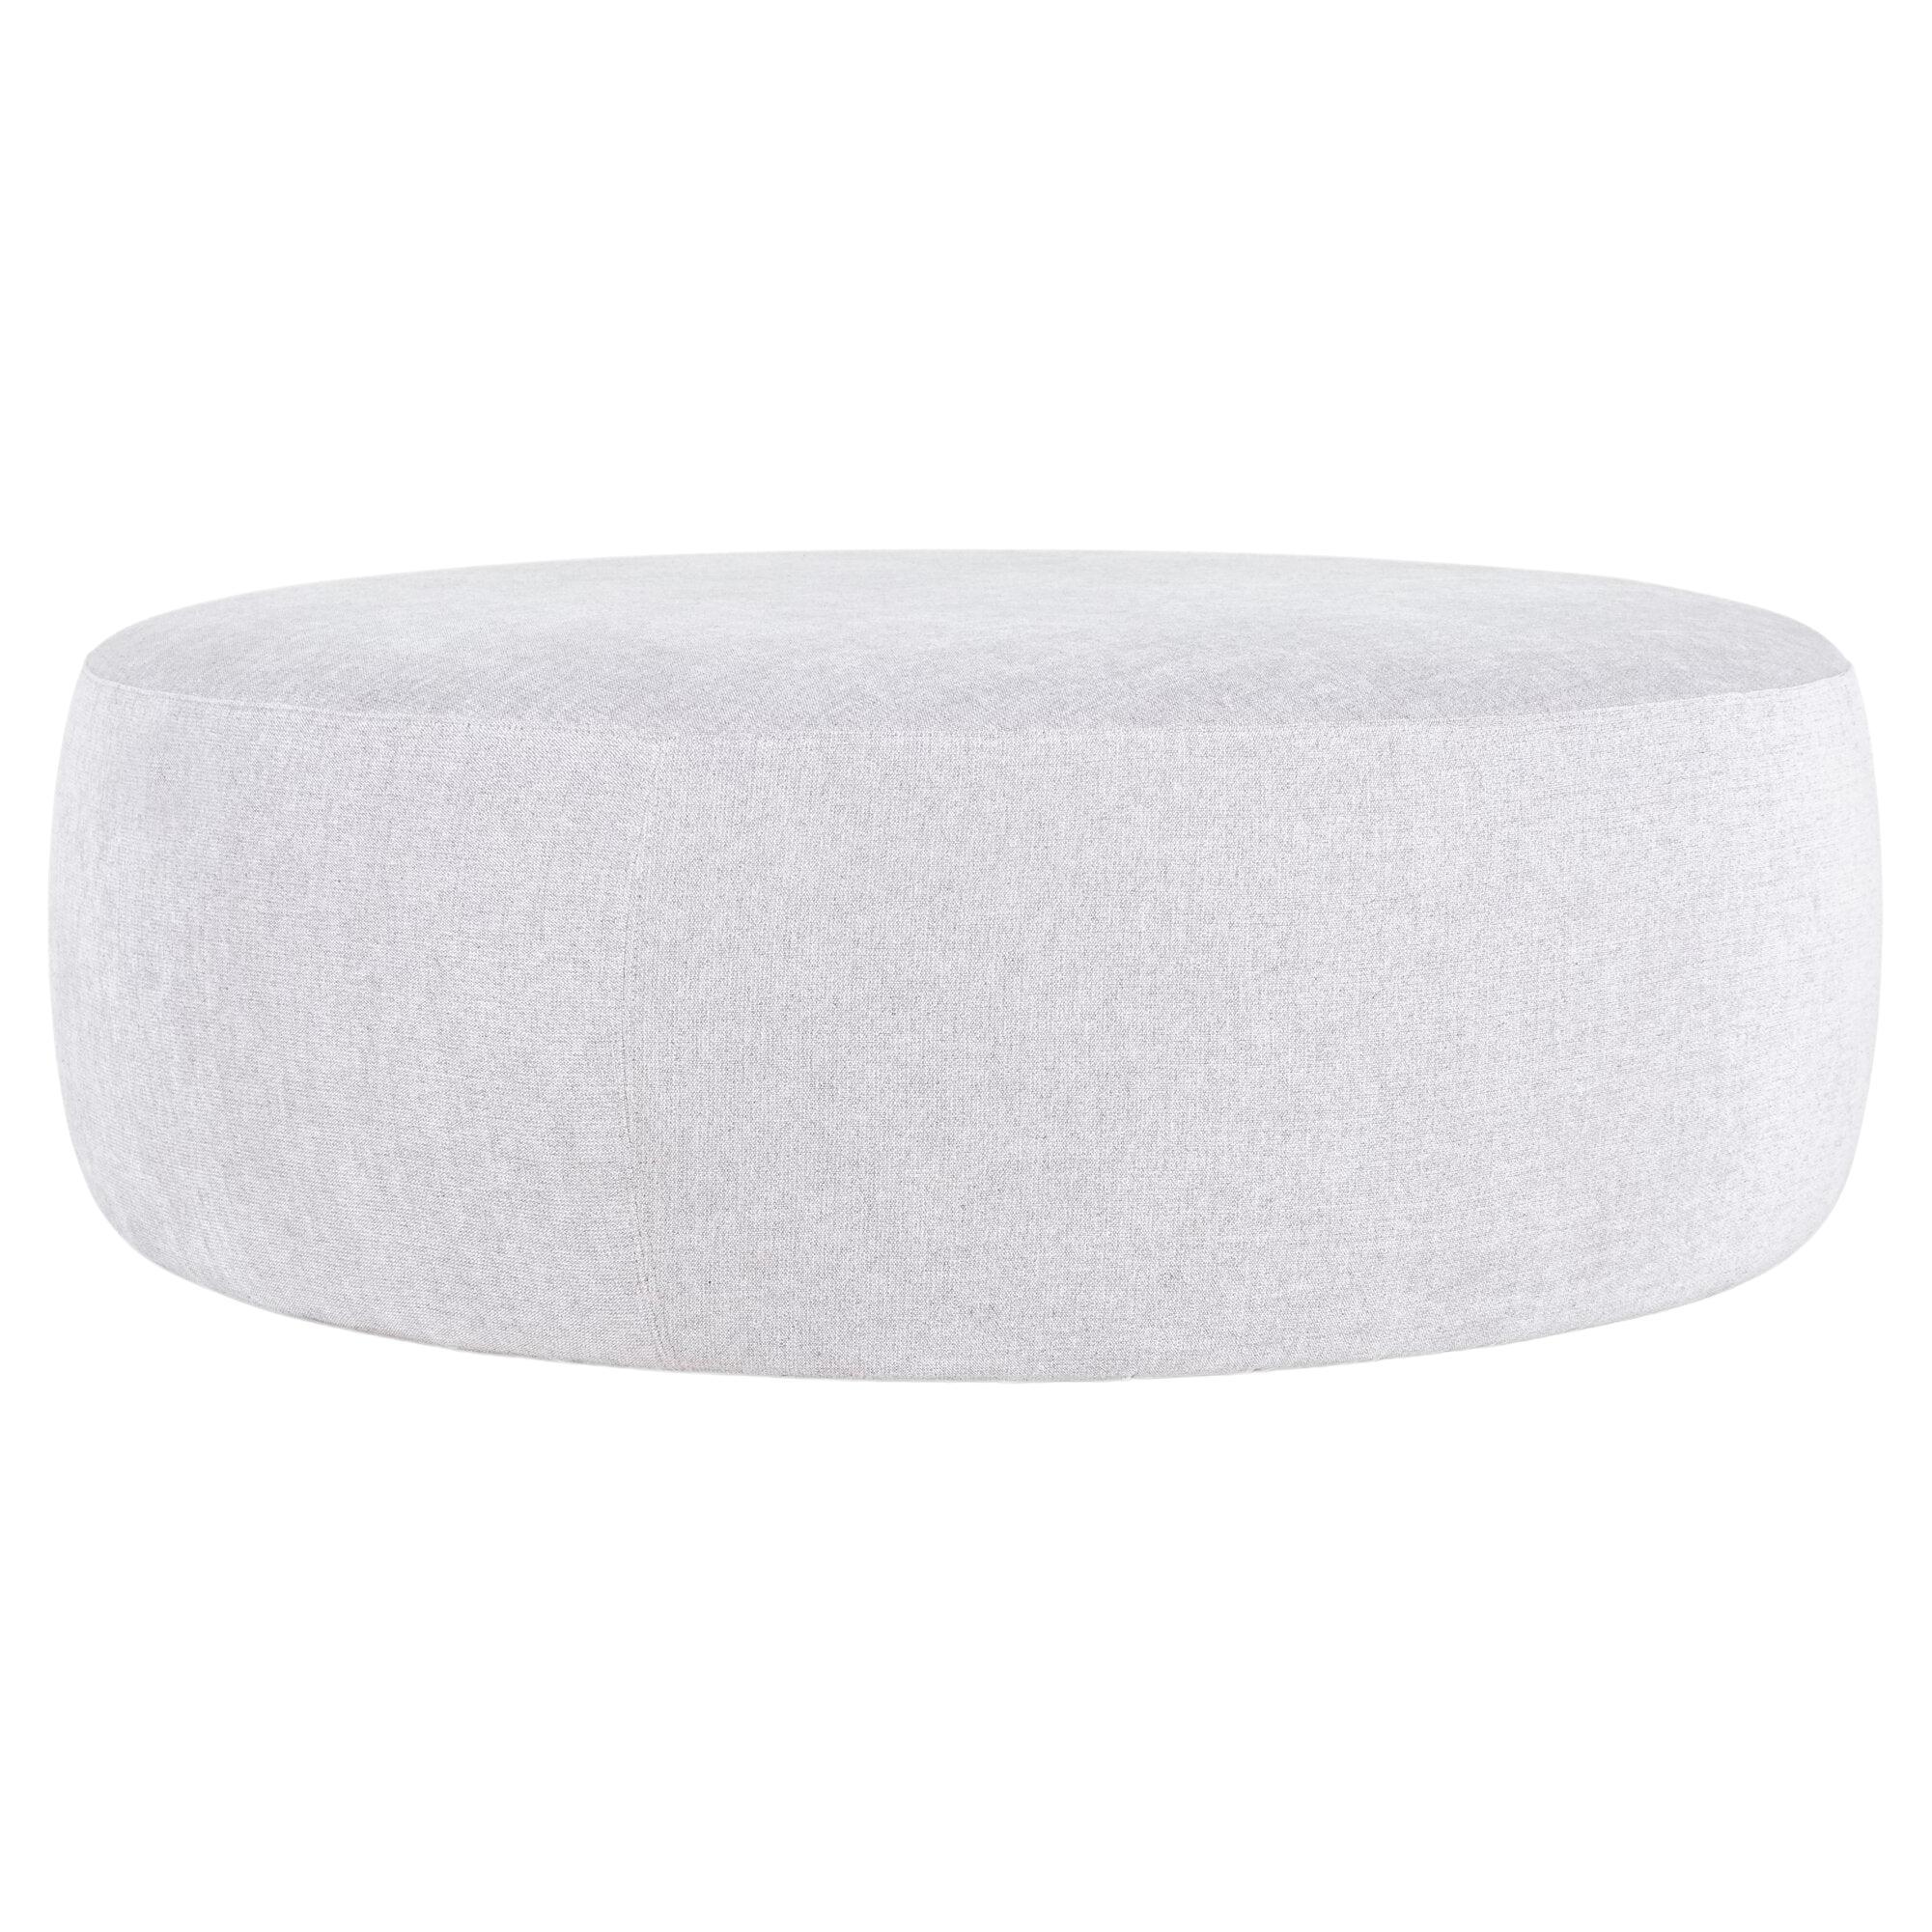 Moooi Pooof Large Pouf in Tonica 2, 171 White Upholstery For Sale